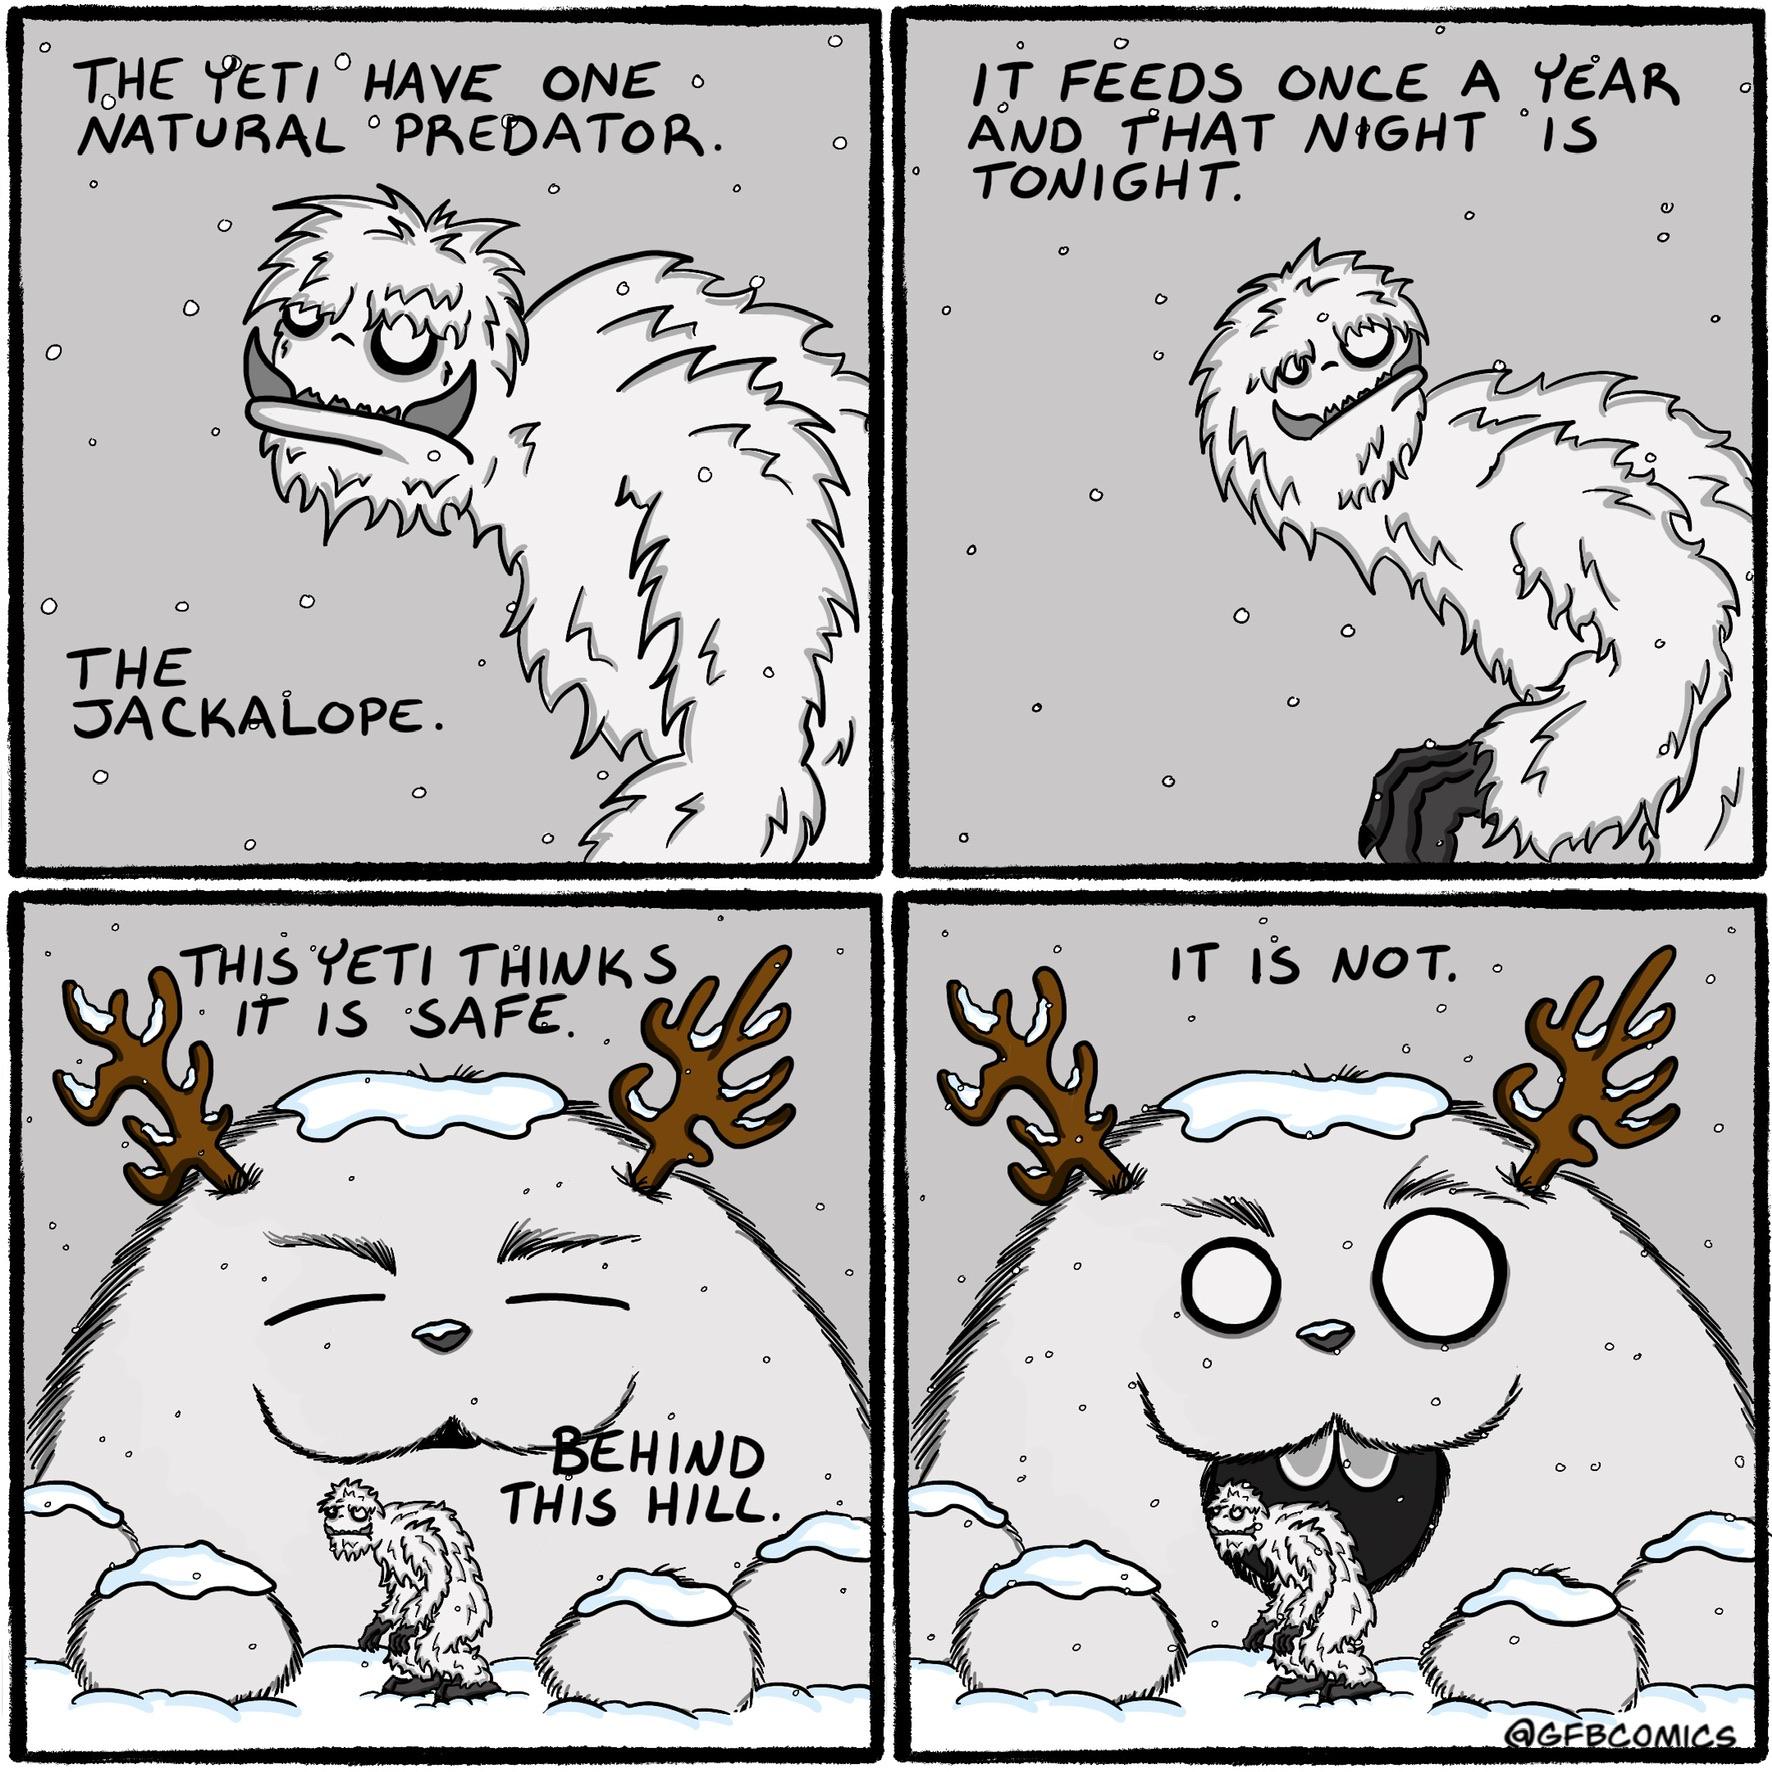 comics comics comics text: THE YETI 0 HAVE ONE NATURAL o PREDAToA. THE 3ACKALoPE. THISYETI THWKS IS SAFE. H IDD THIS HILL. if 4 IT FEEDS OMC-E A EAR fHAT NIGHT -roNlGHT. 4 IT IS NOT. OqO 4 